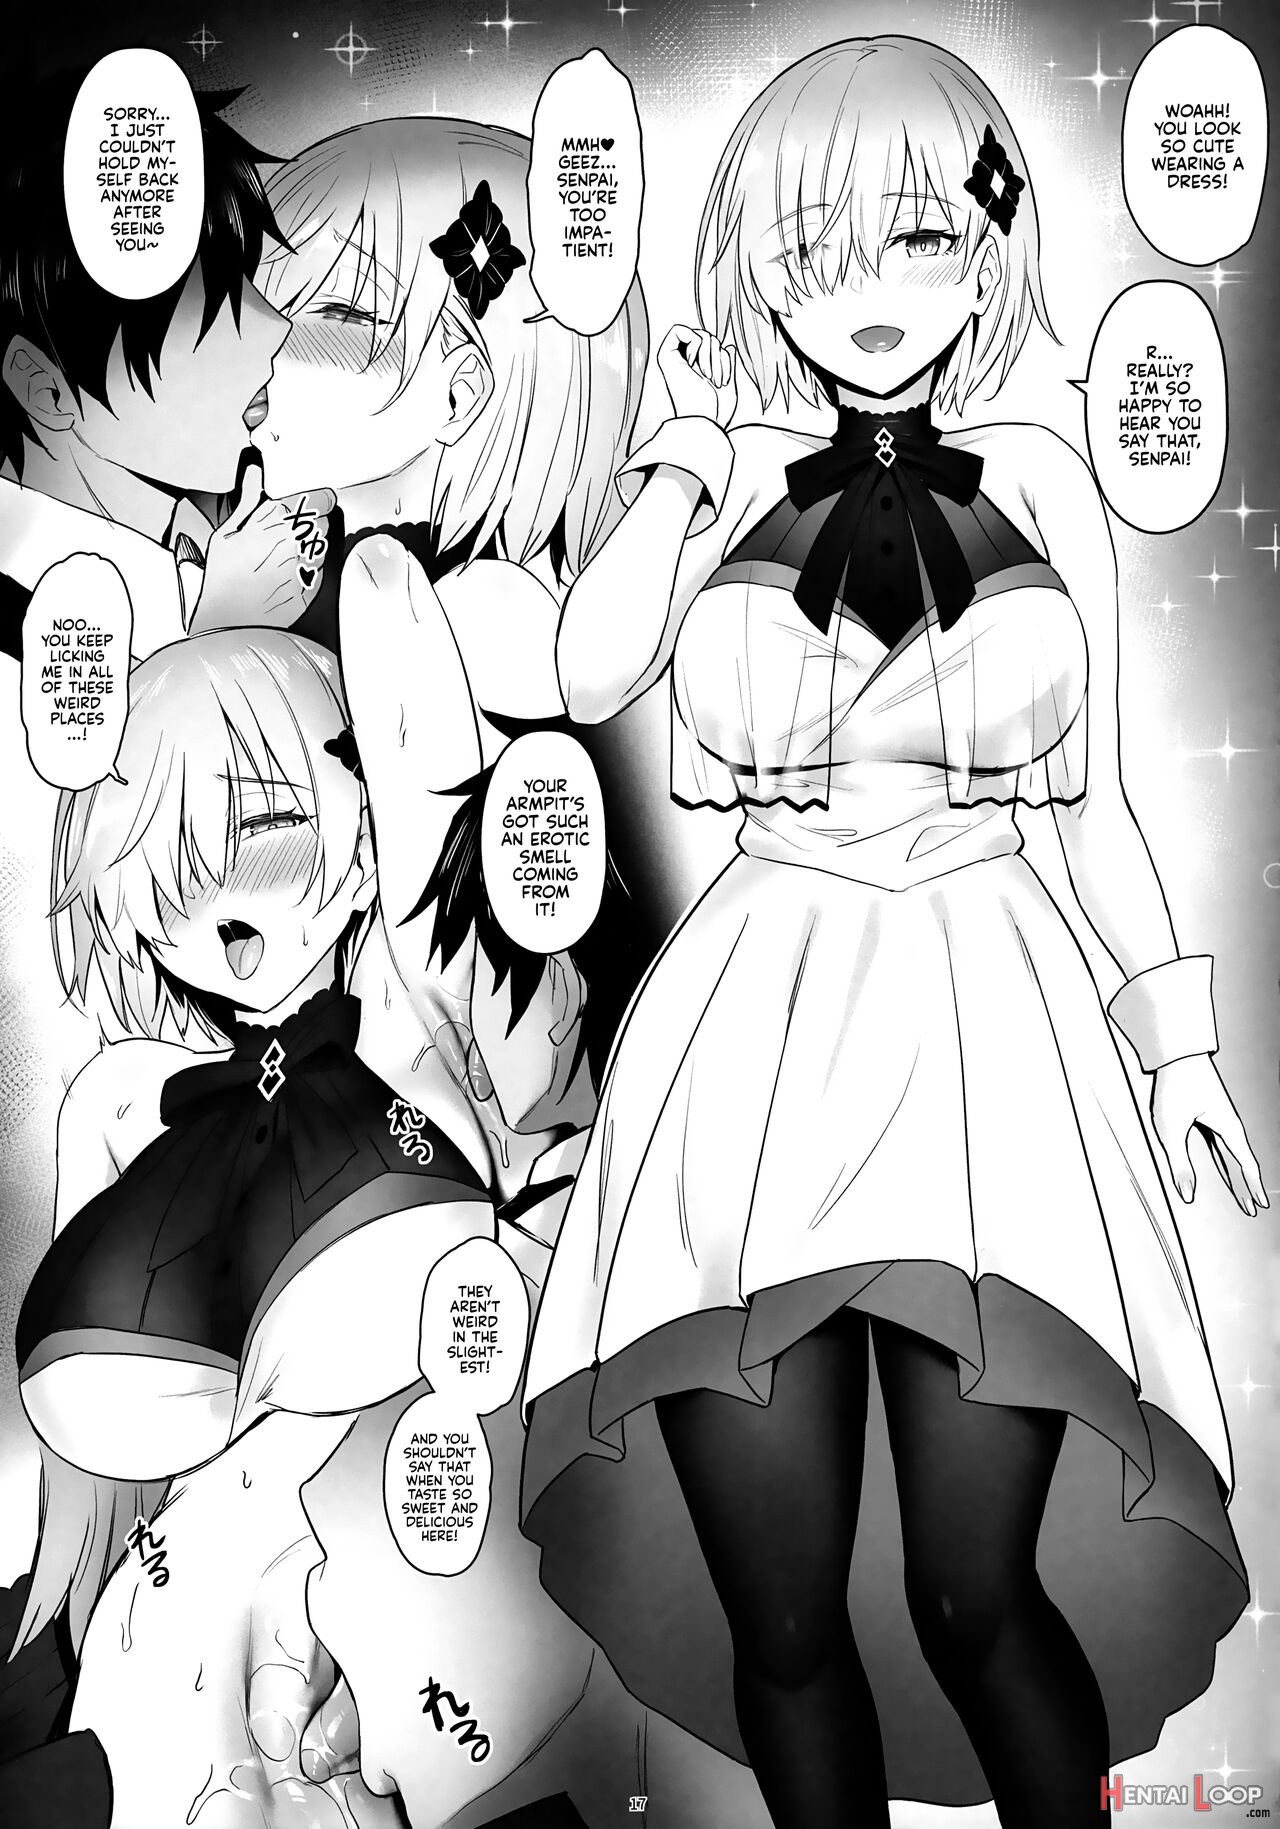 Love Is In The Air At Chaldea Once Again! page 16